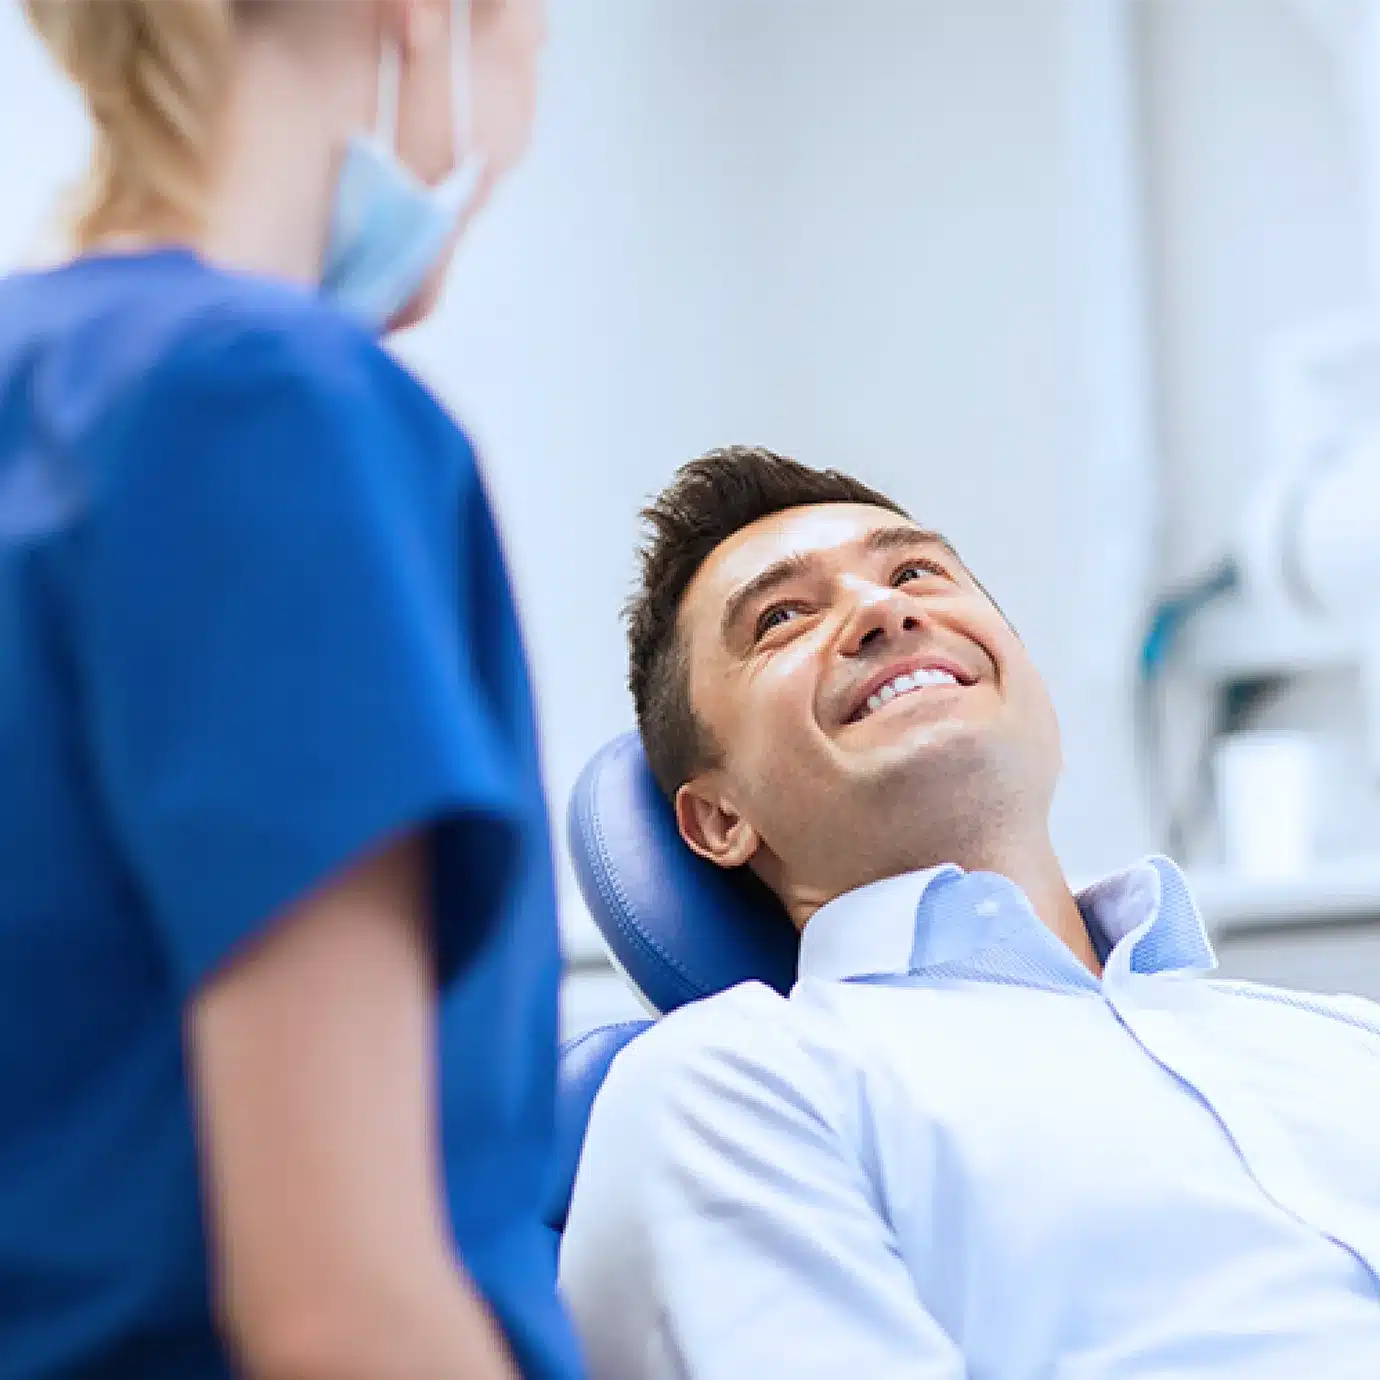 Do you need sedation during dental hygiene appointments?